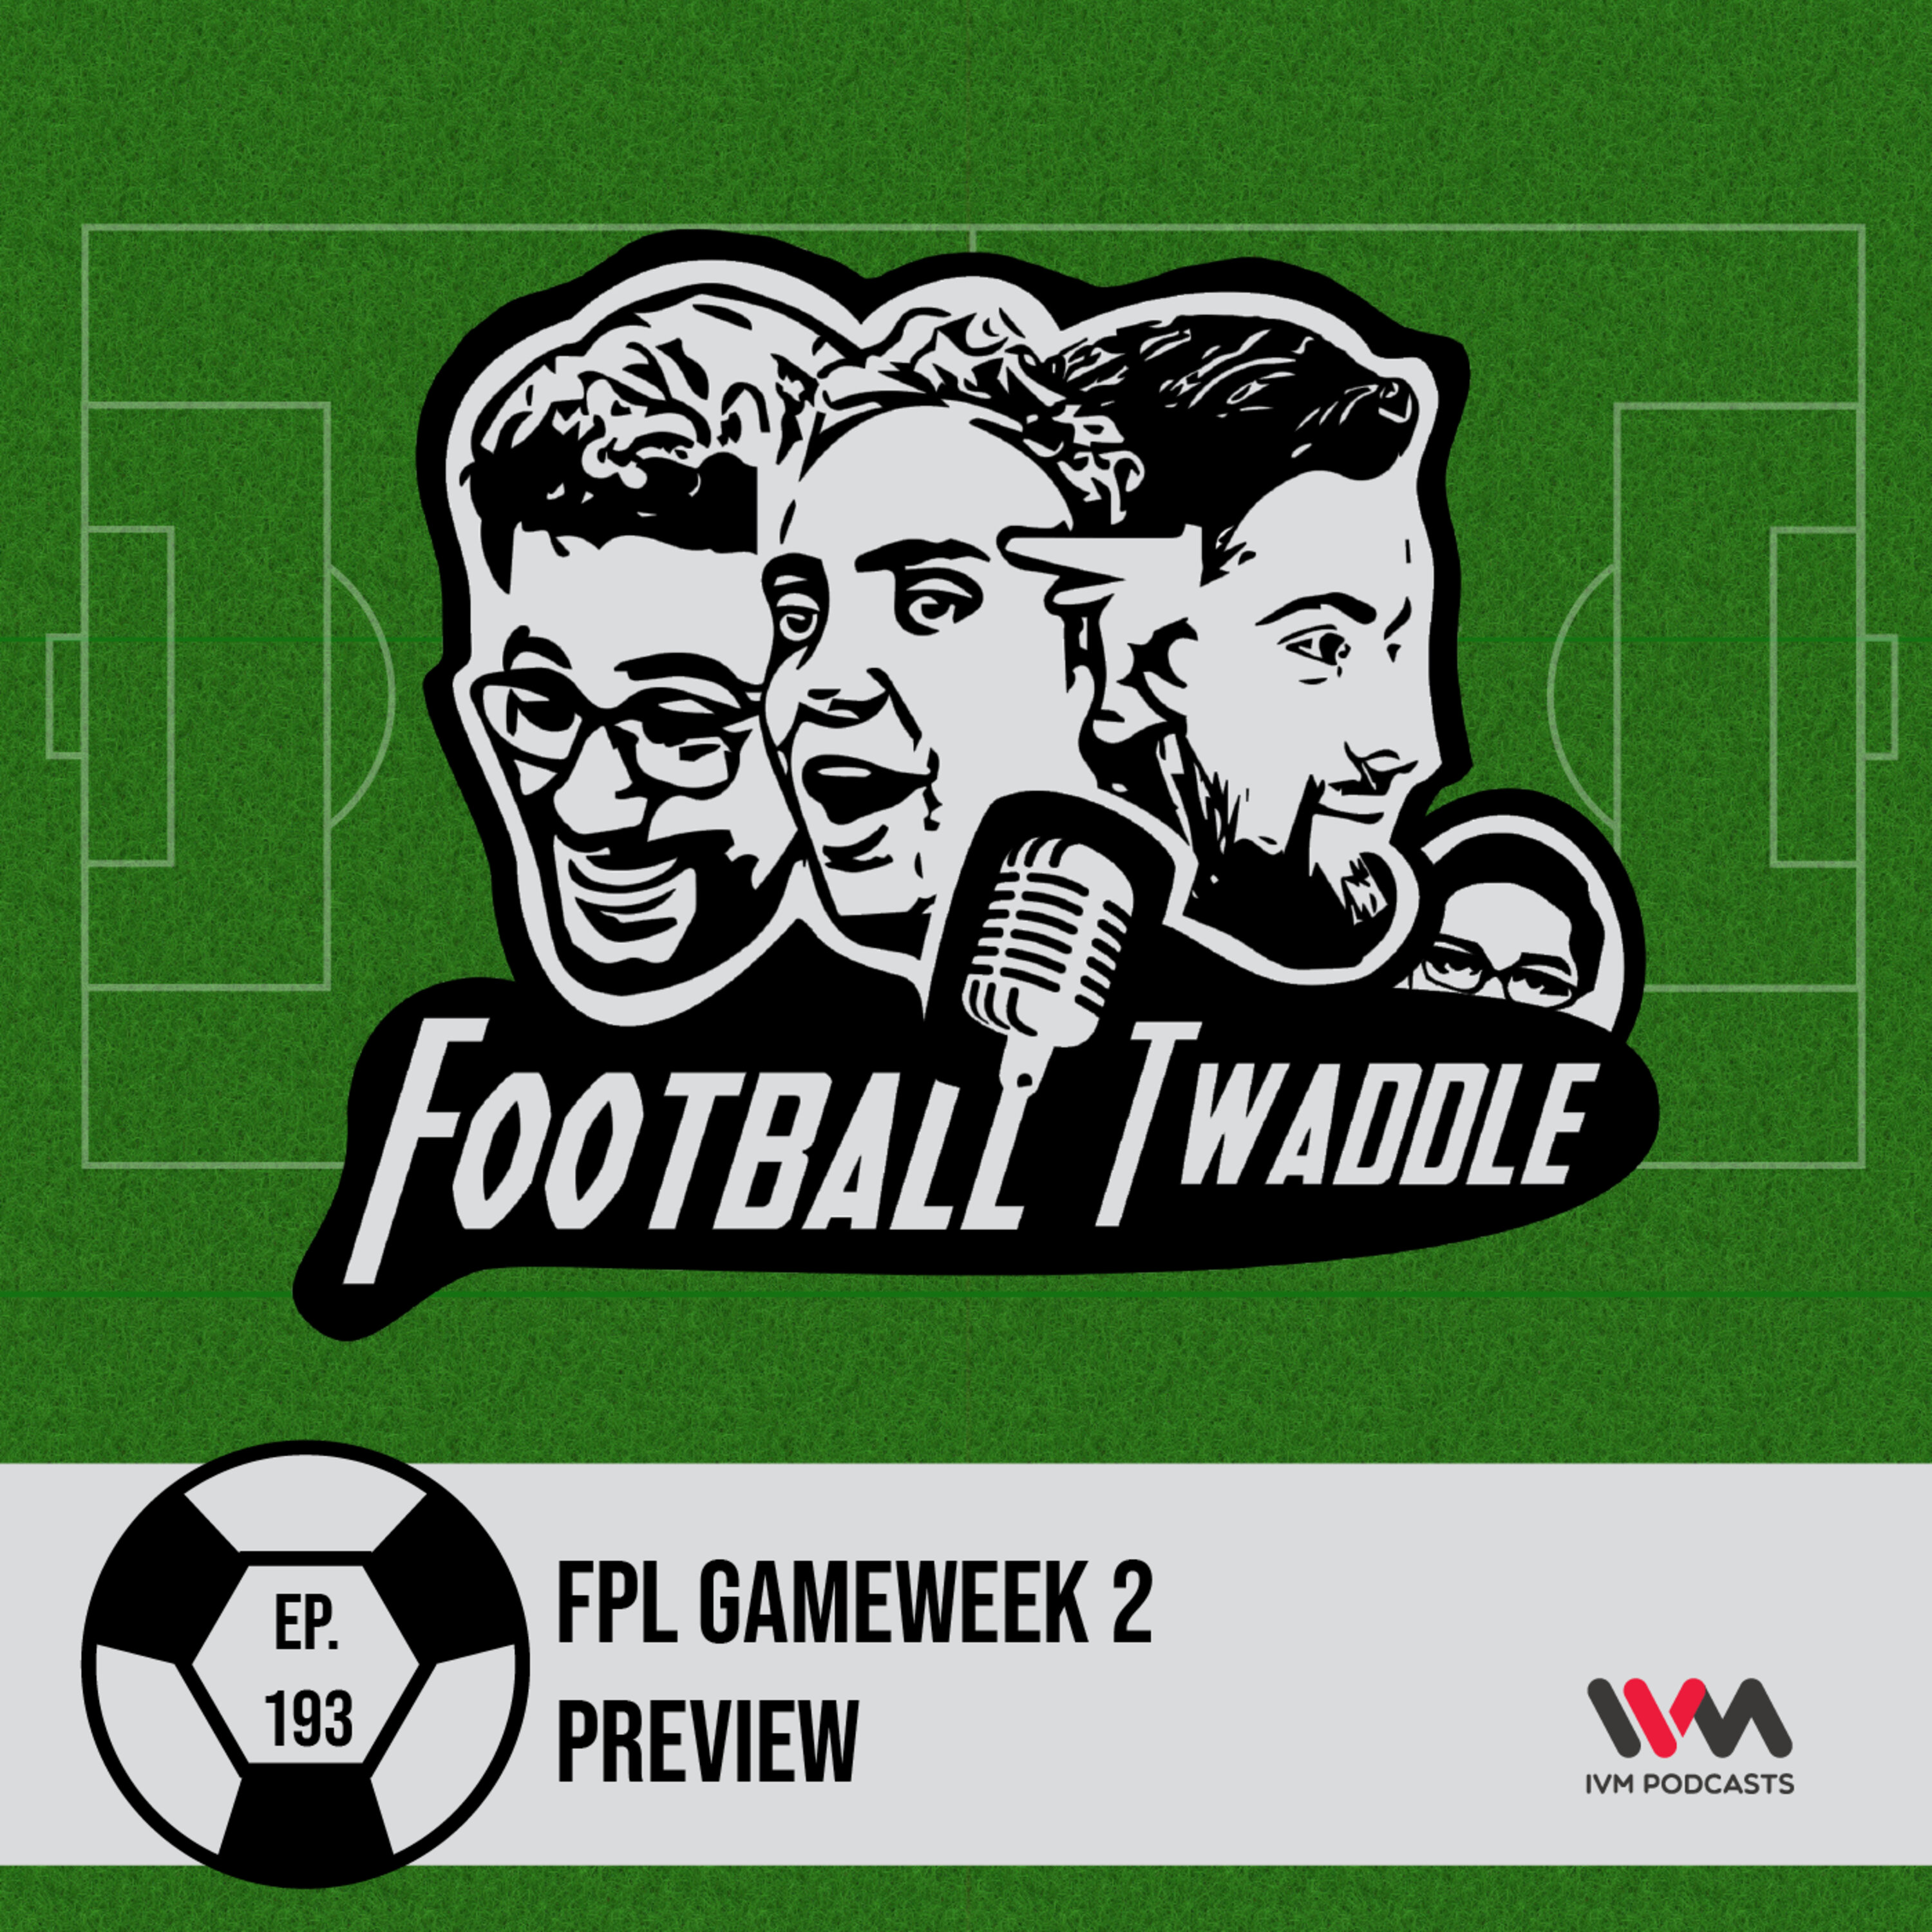 FPL Gameweek 2 Preview